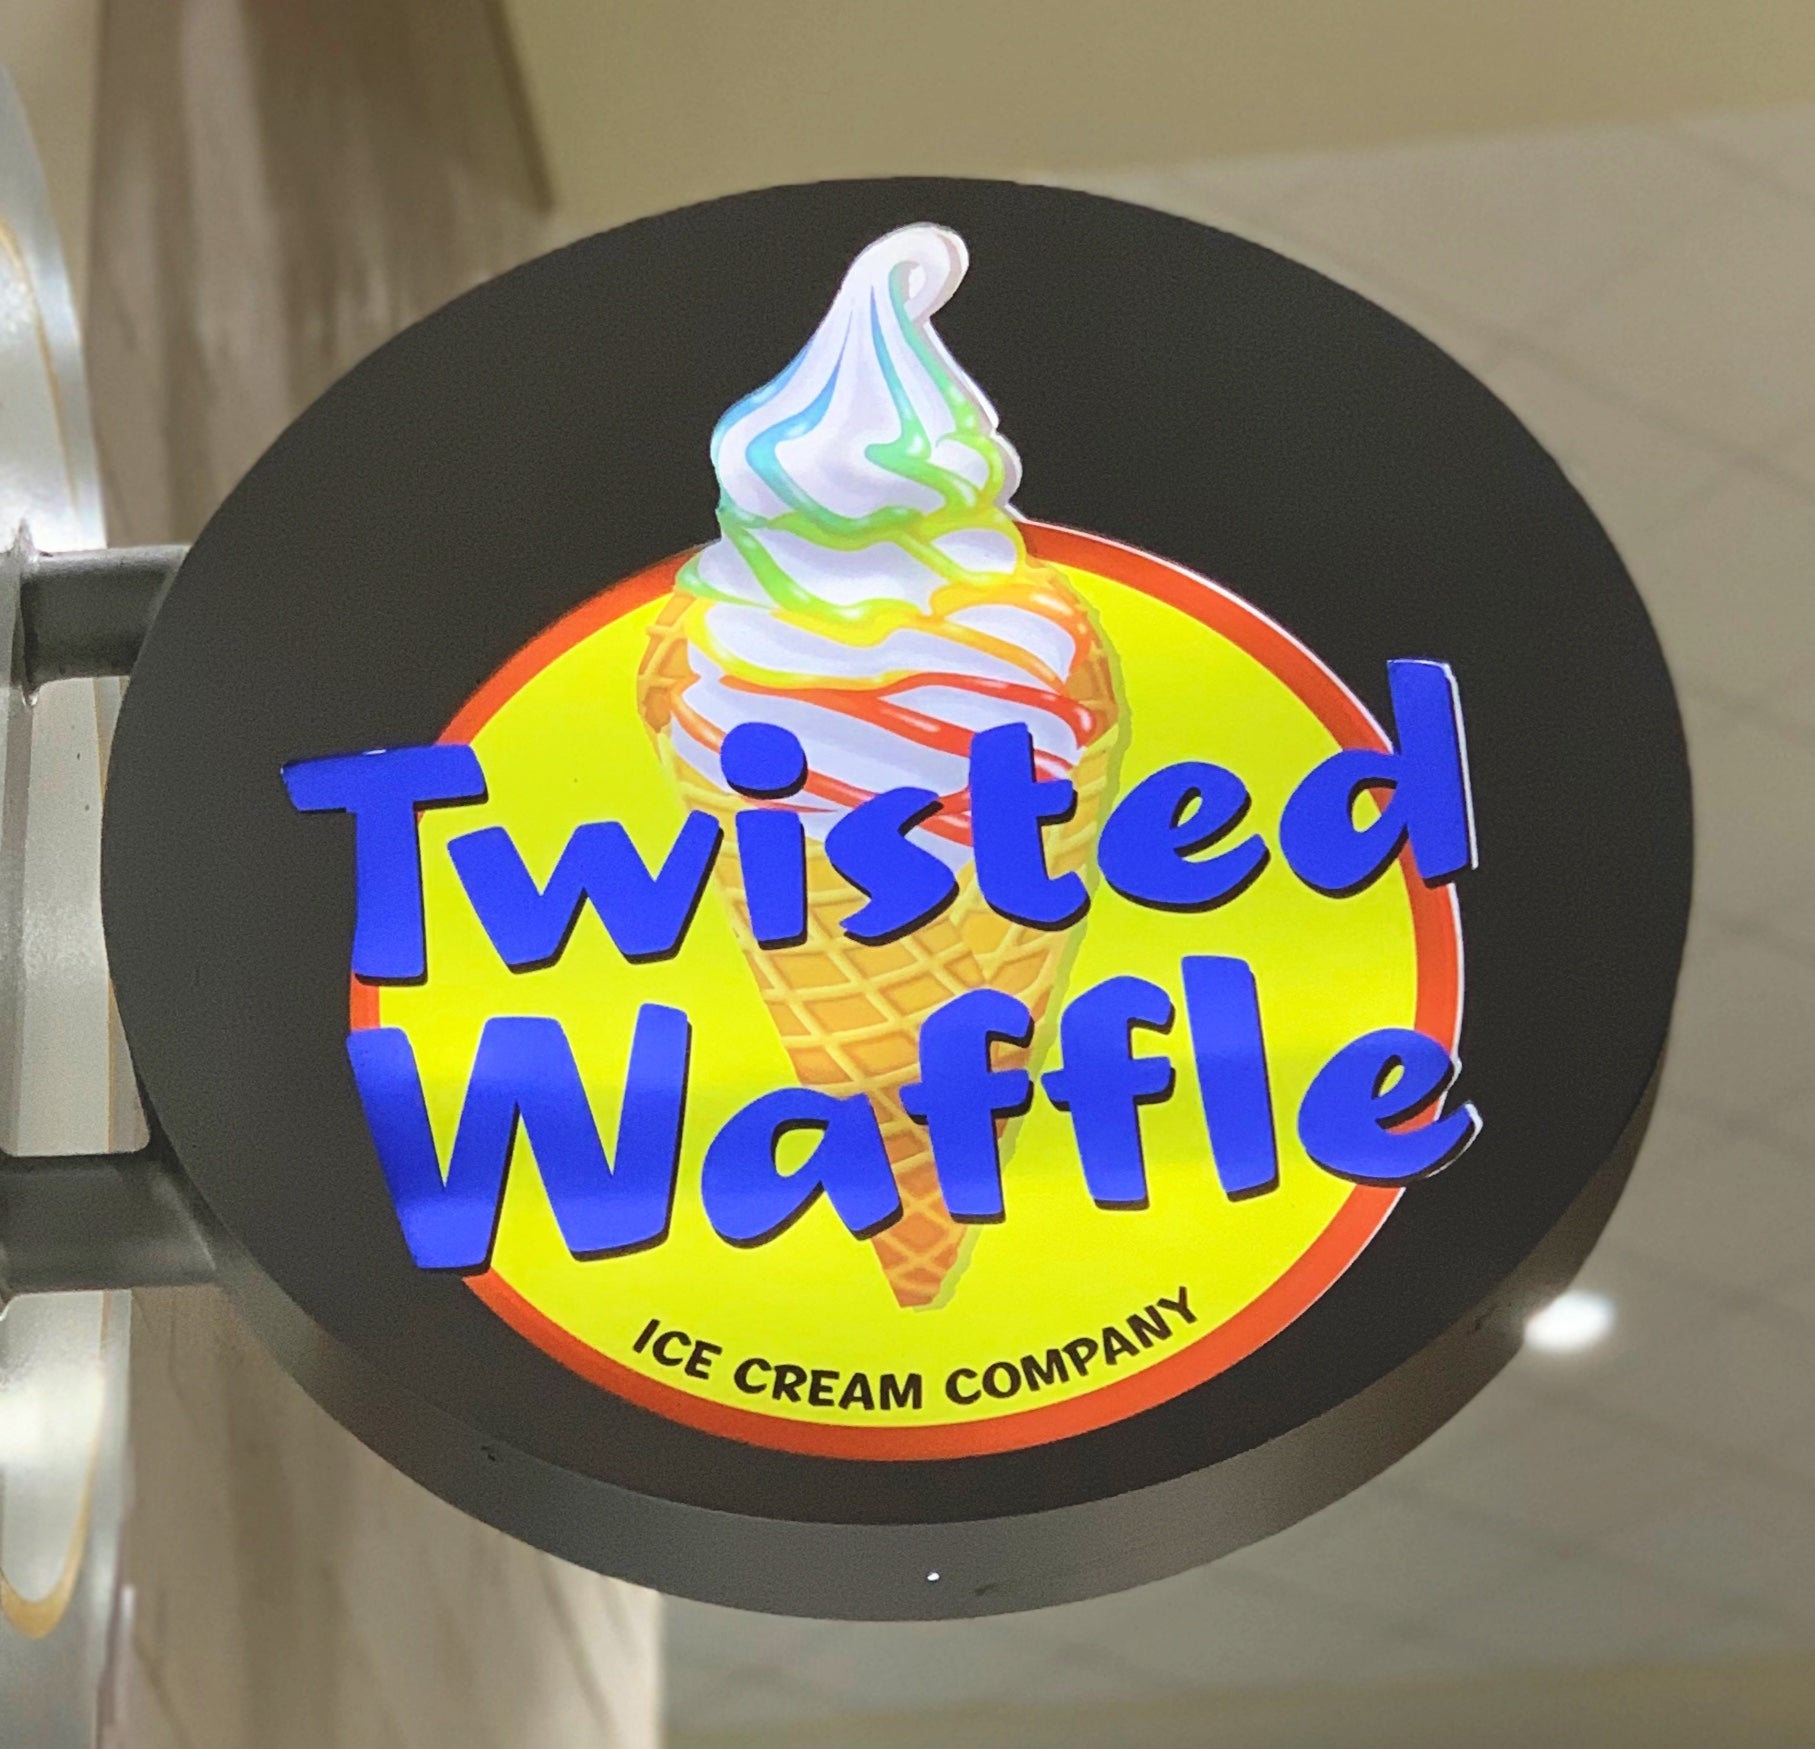 Twisted Waffle: Sections 116